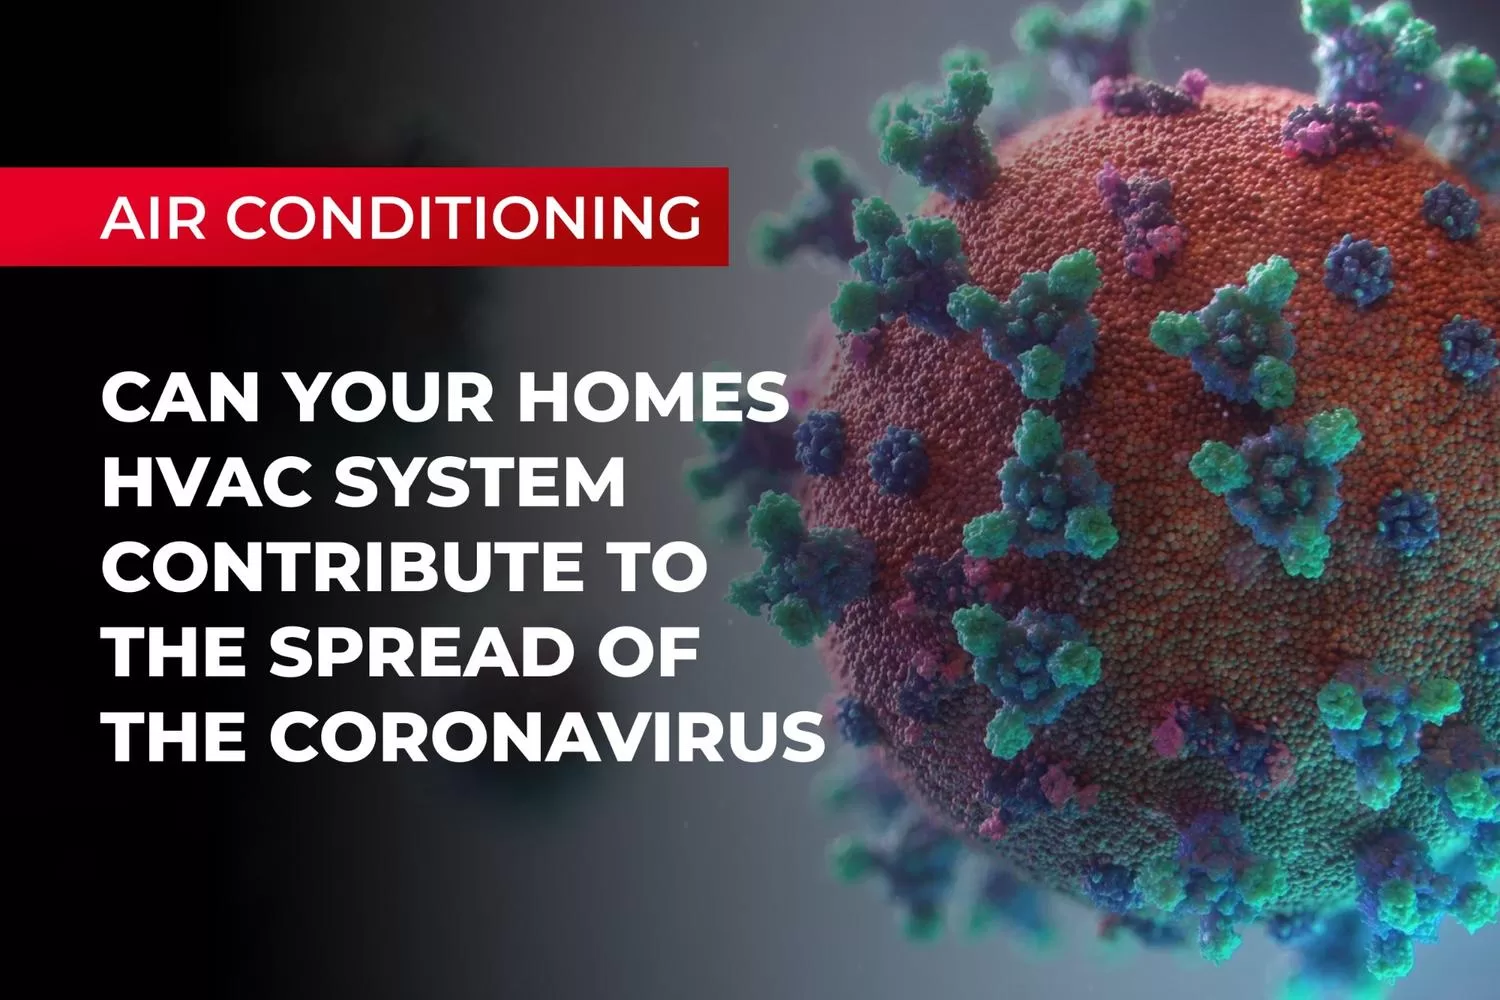 Can Your Home’s HVAC System Contribute to the Spread of the Coronavirus?